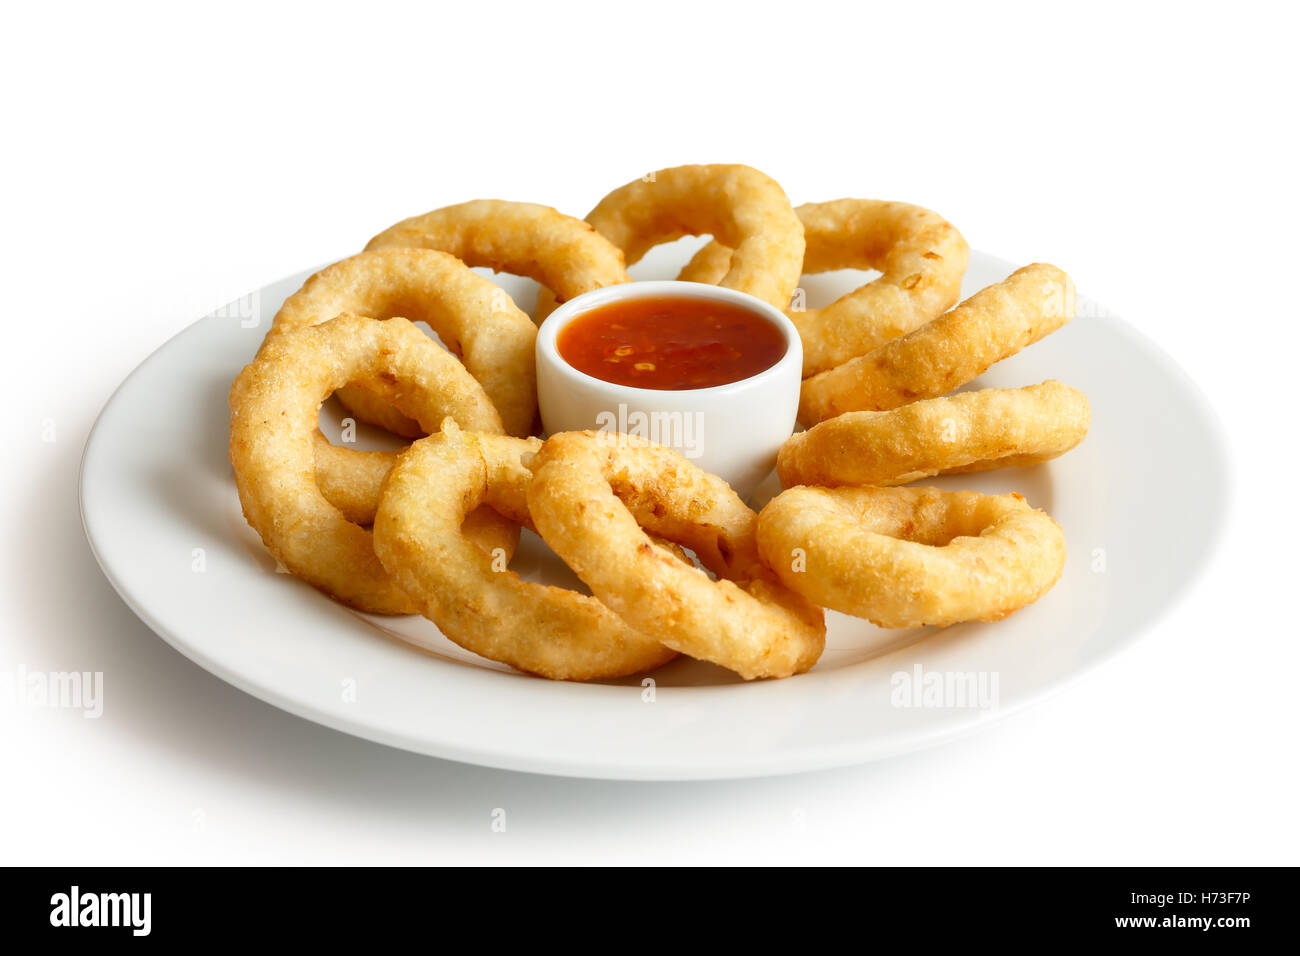 Heap of deep fried onion or calamari rings with chilli dip on white plate. Stock Photo